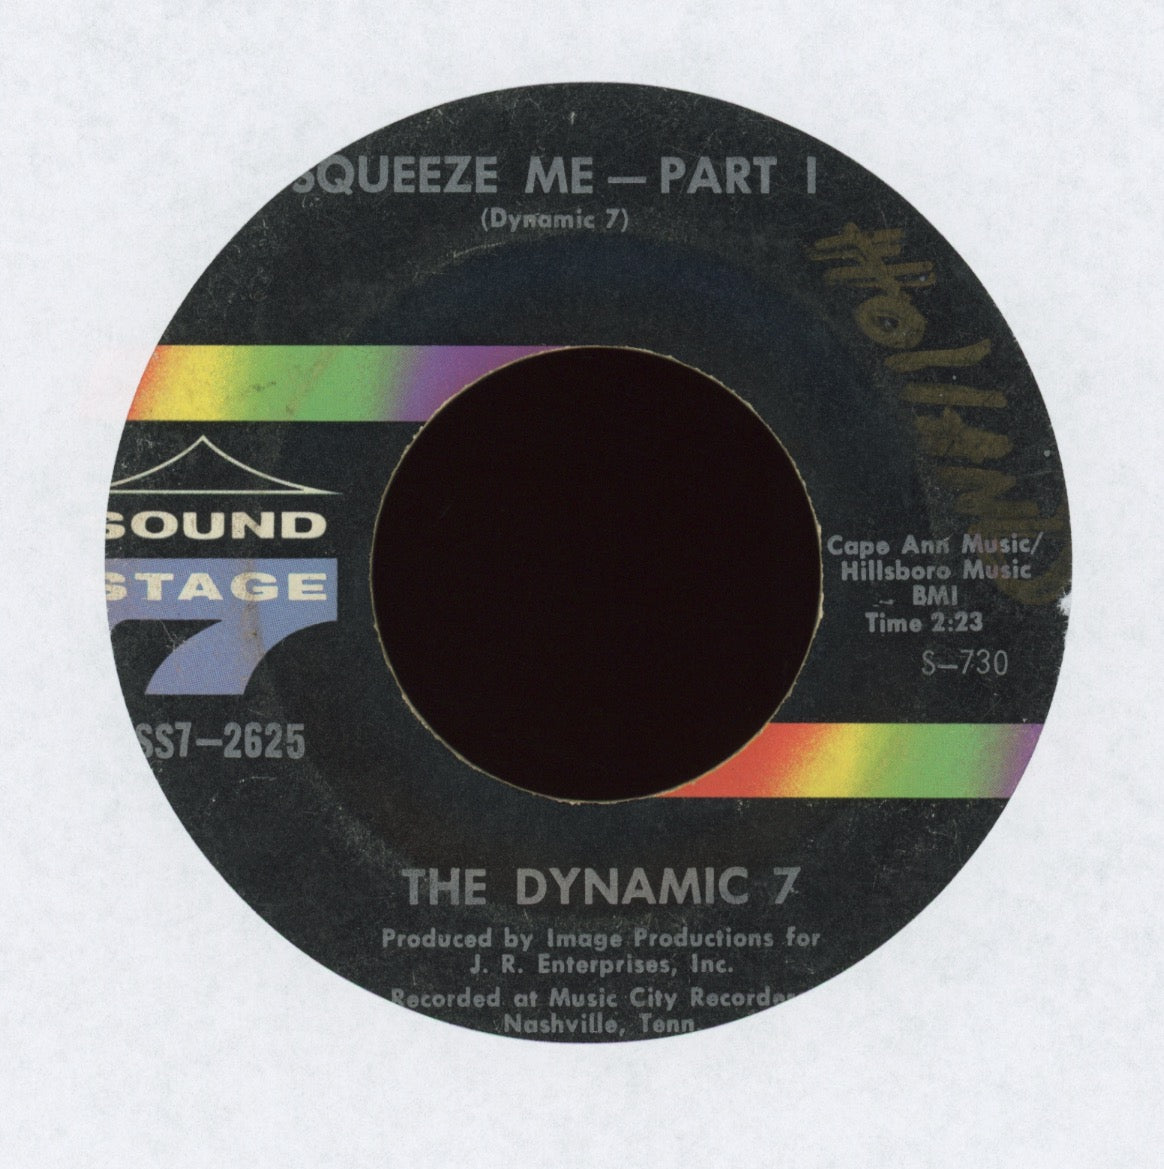 Dynamic 7 - Squeeze Me on Sound Stage 7